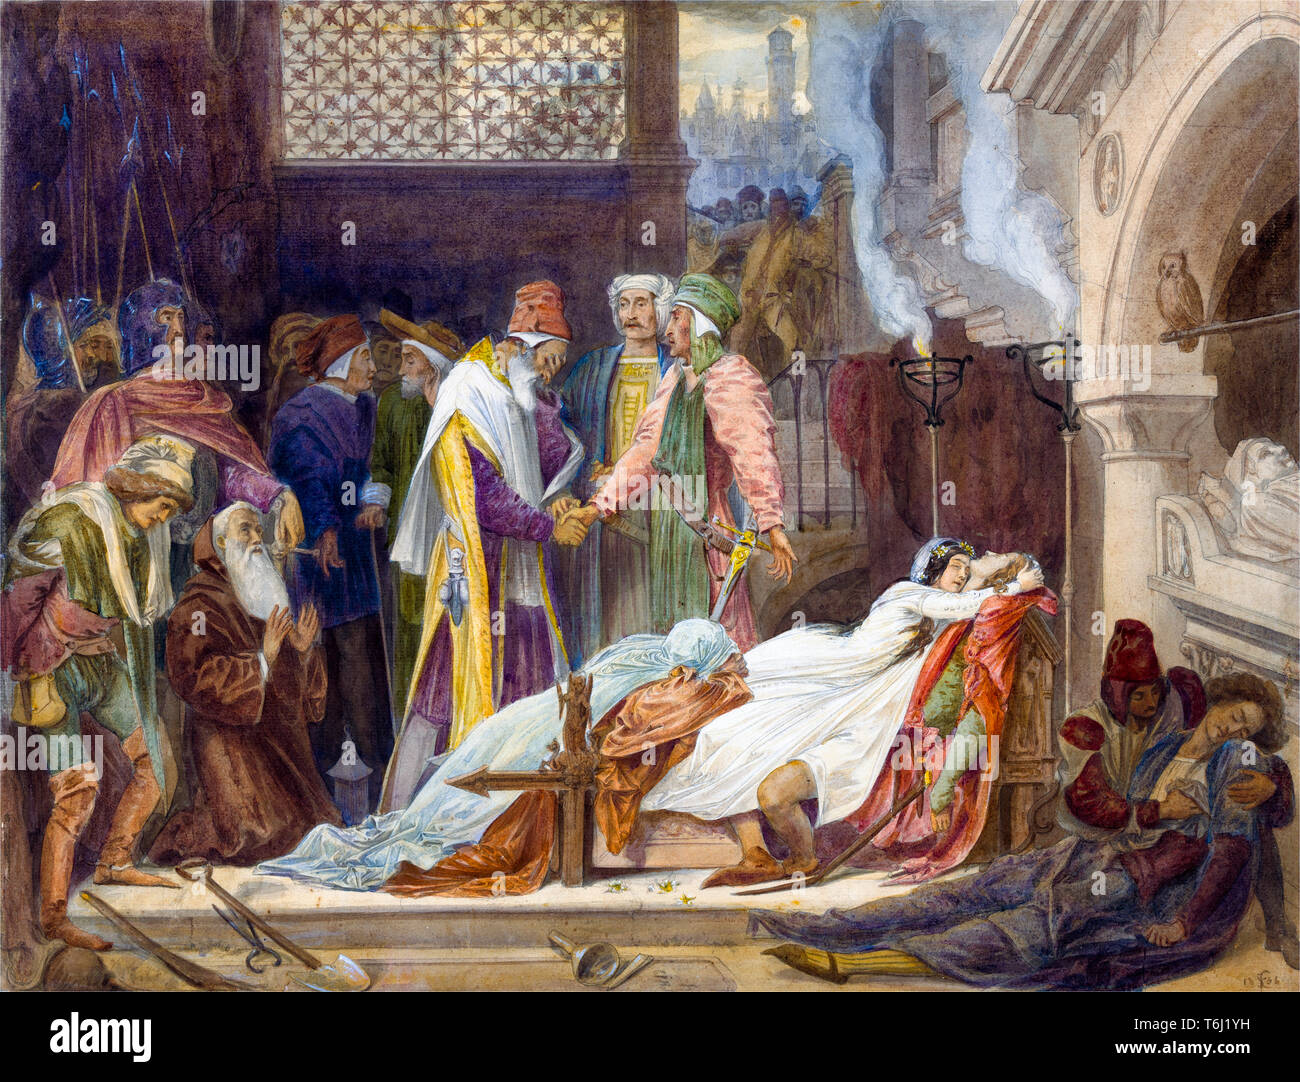 The Reconciliation of the Montagues and Capulets over the Dead Bodies of Romeo and Juliet, painting by Frederic Leighton, 1854 Stock Photo